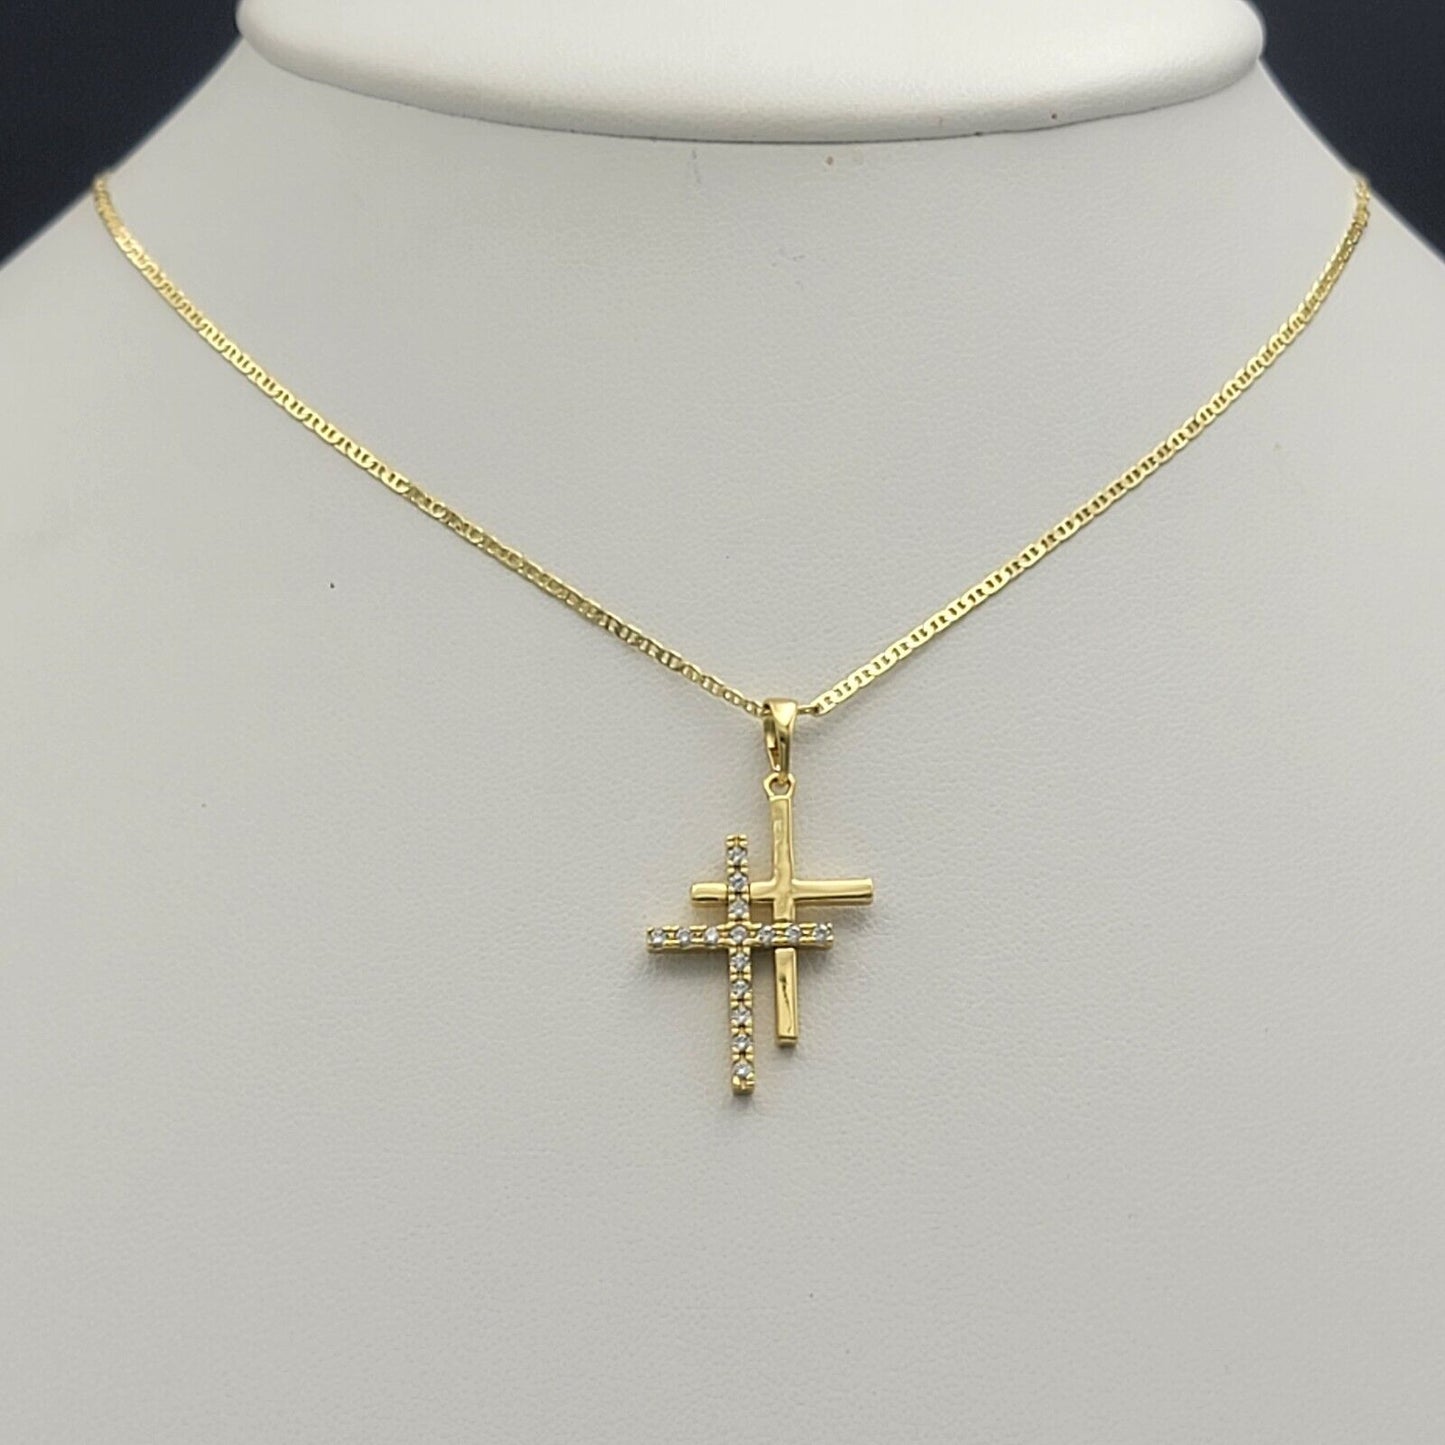 Necklaces - 14K Gold Plated. Double Cross Clear Crystals Pendant & Chain.